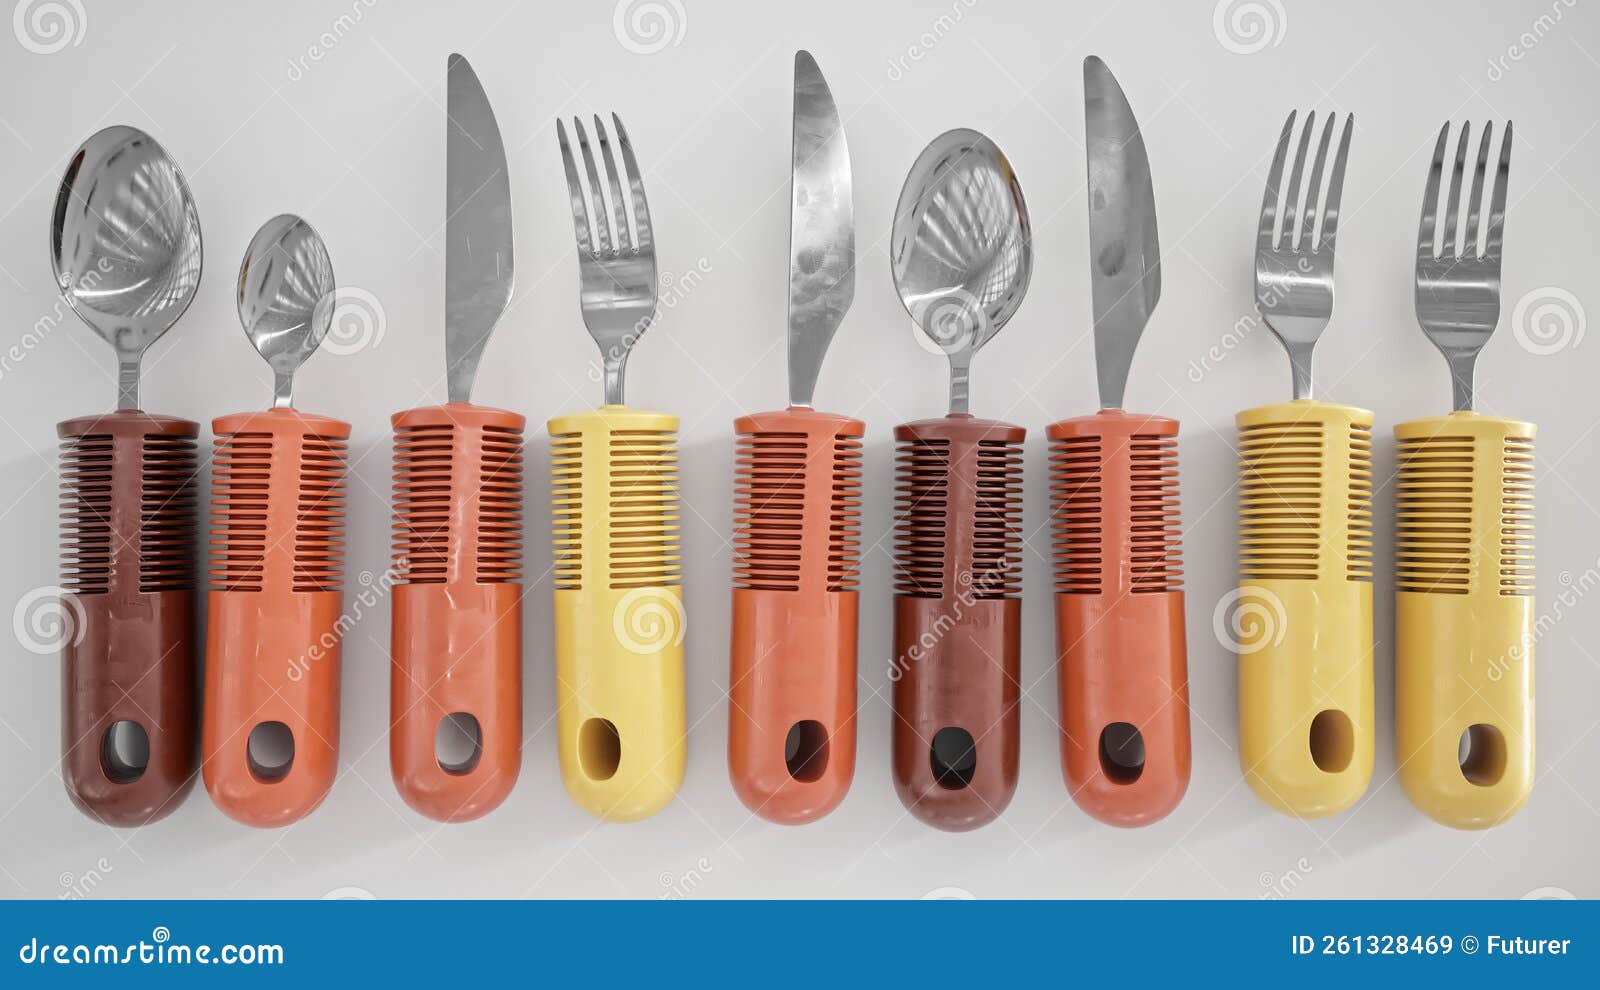 ergonomic cutlery for the elderly, with arthritis, parkinson's, apoplexy and the disabled - 3d rendering